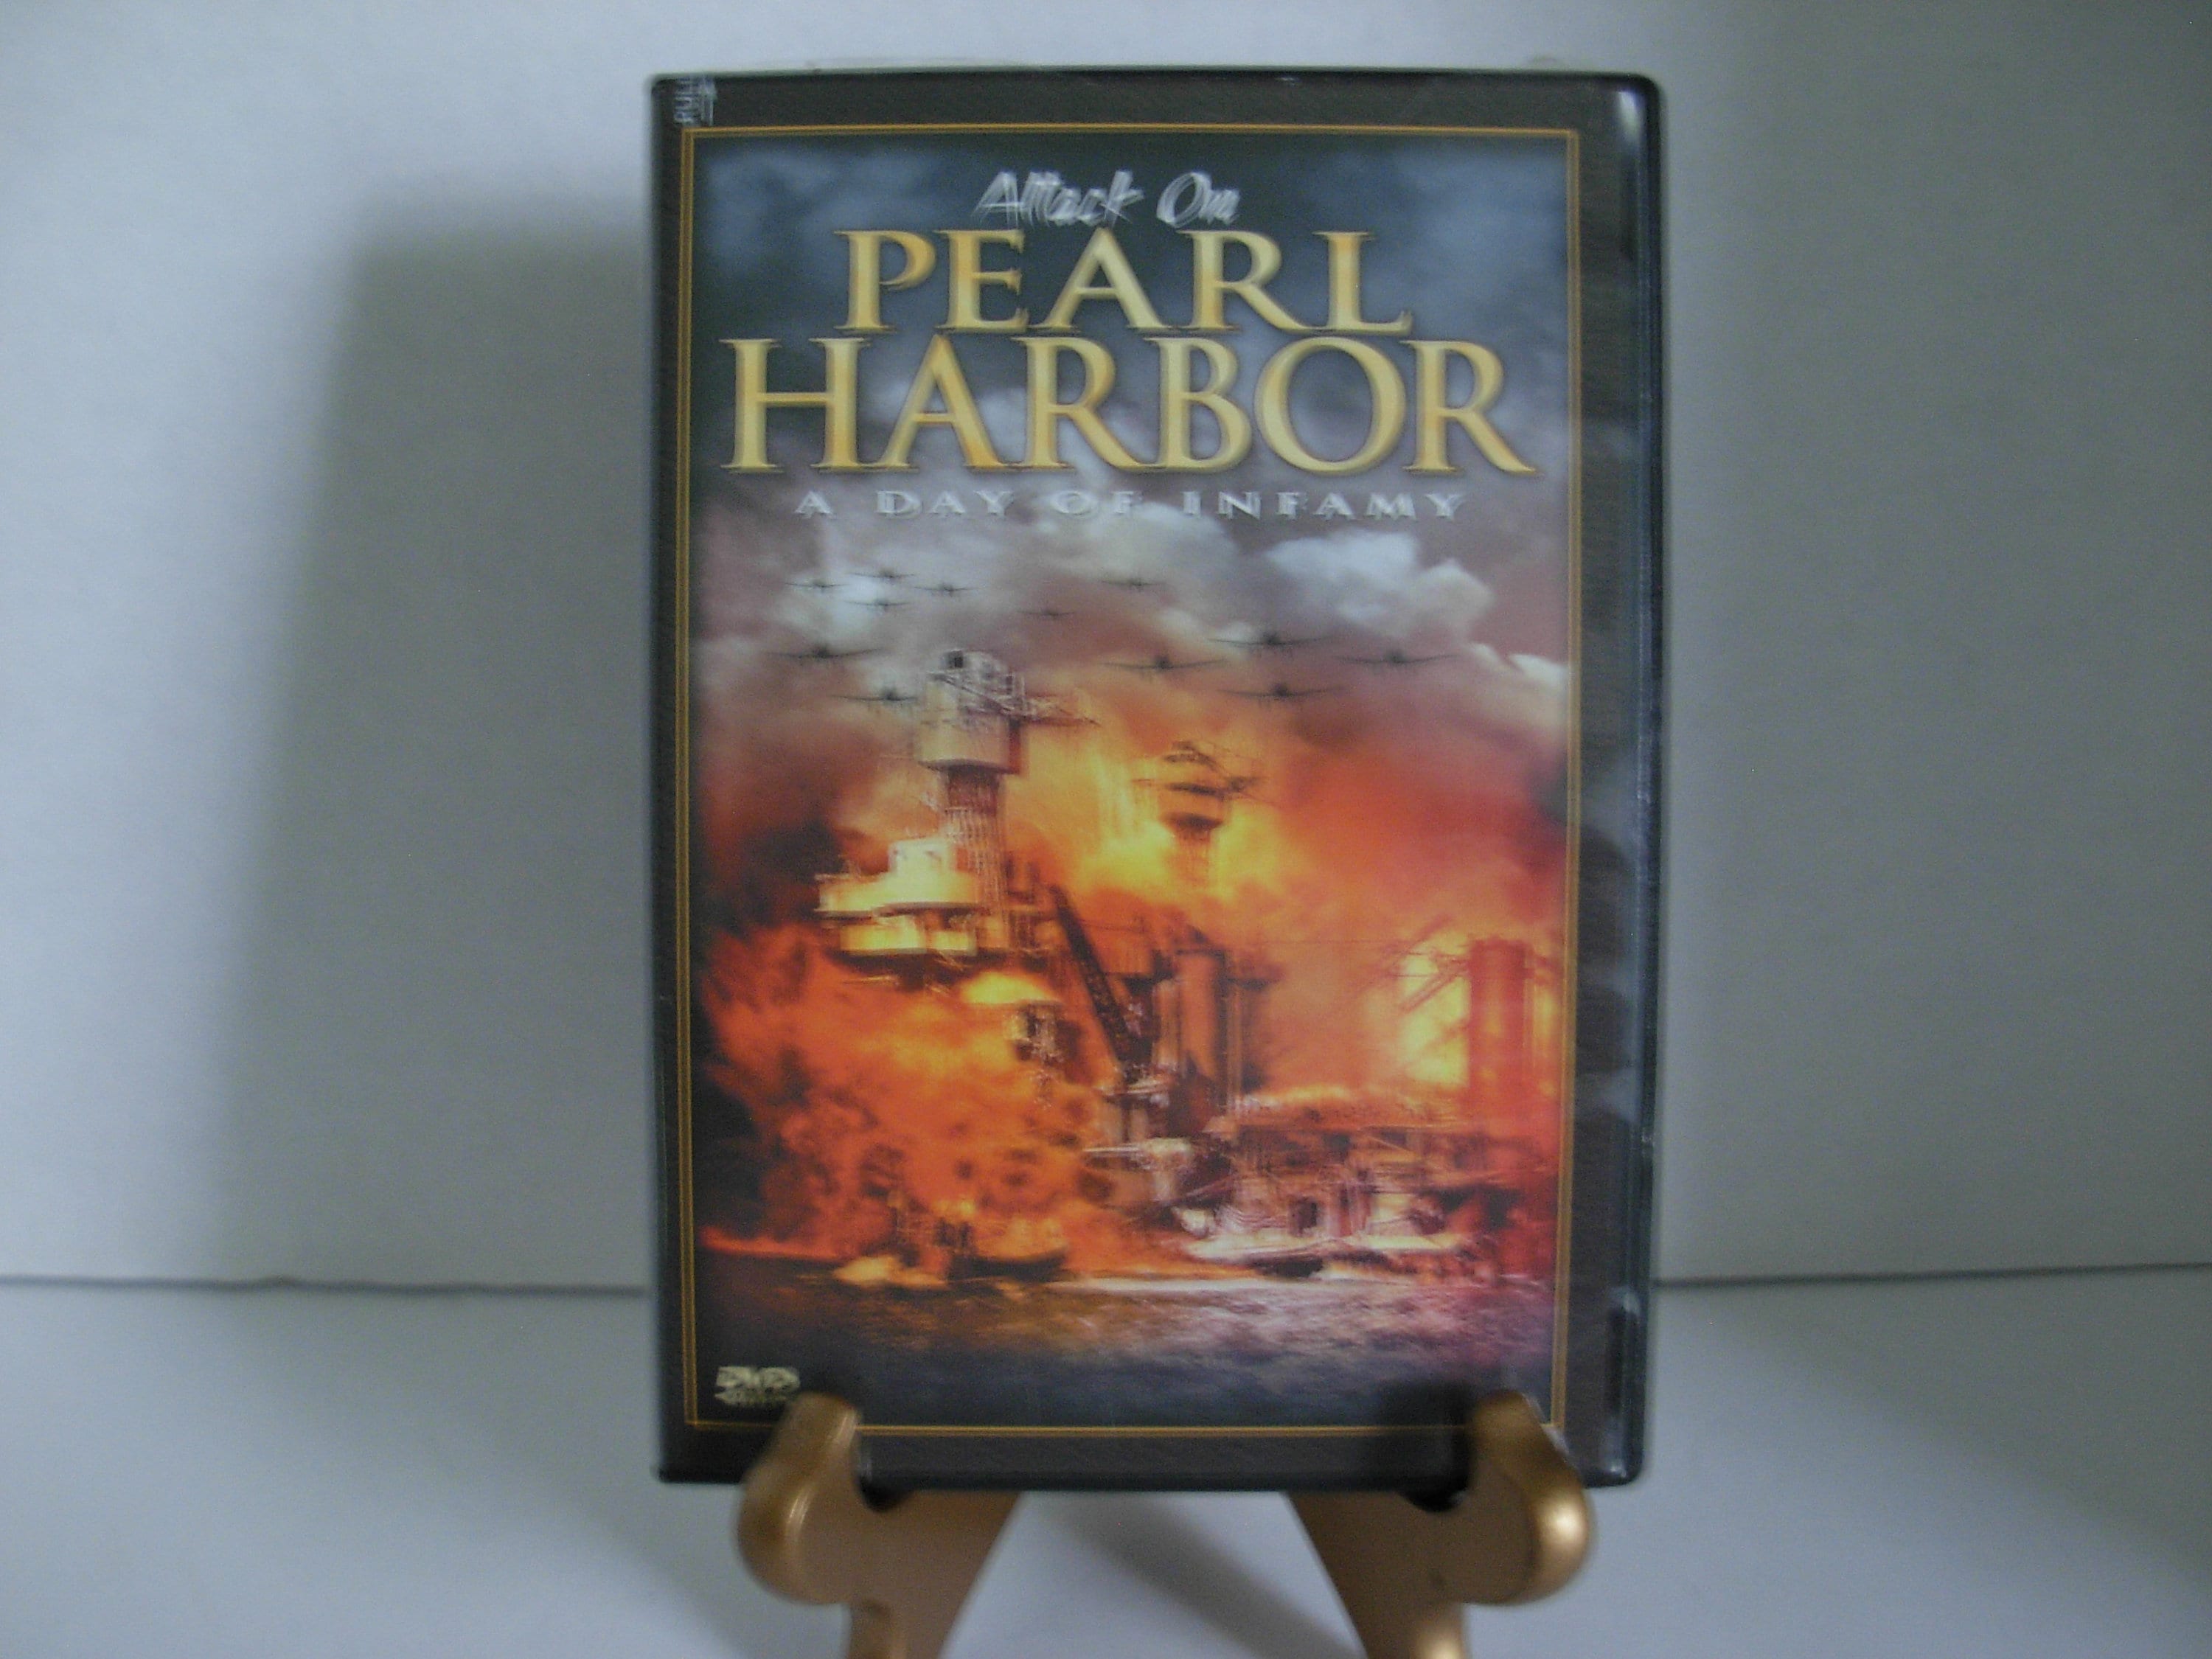 Buy DVD Tape Attack on Pearl Harbor A Day of Infamy B & W Online in India 